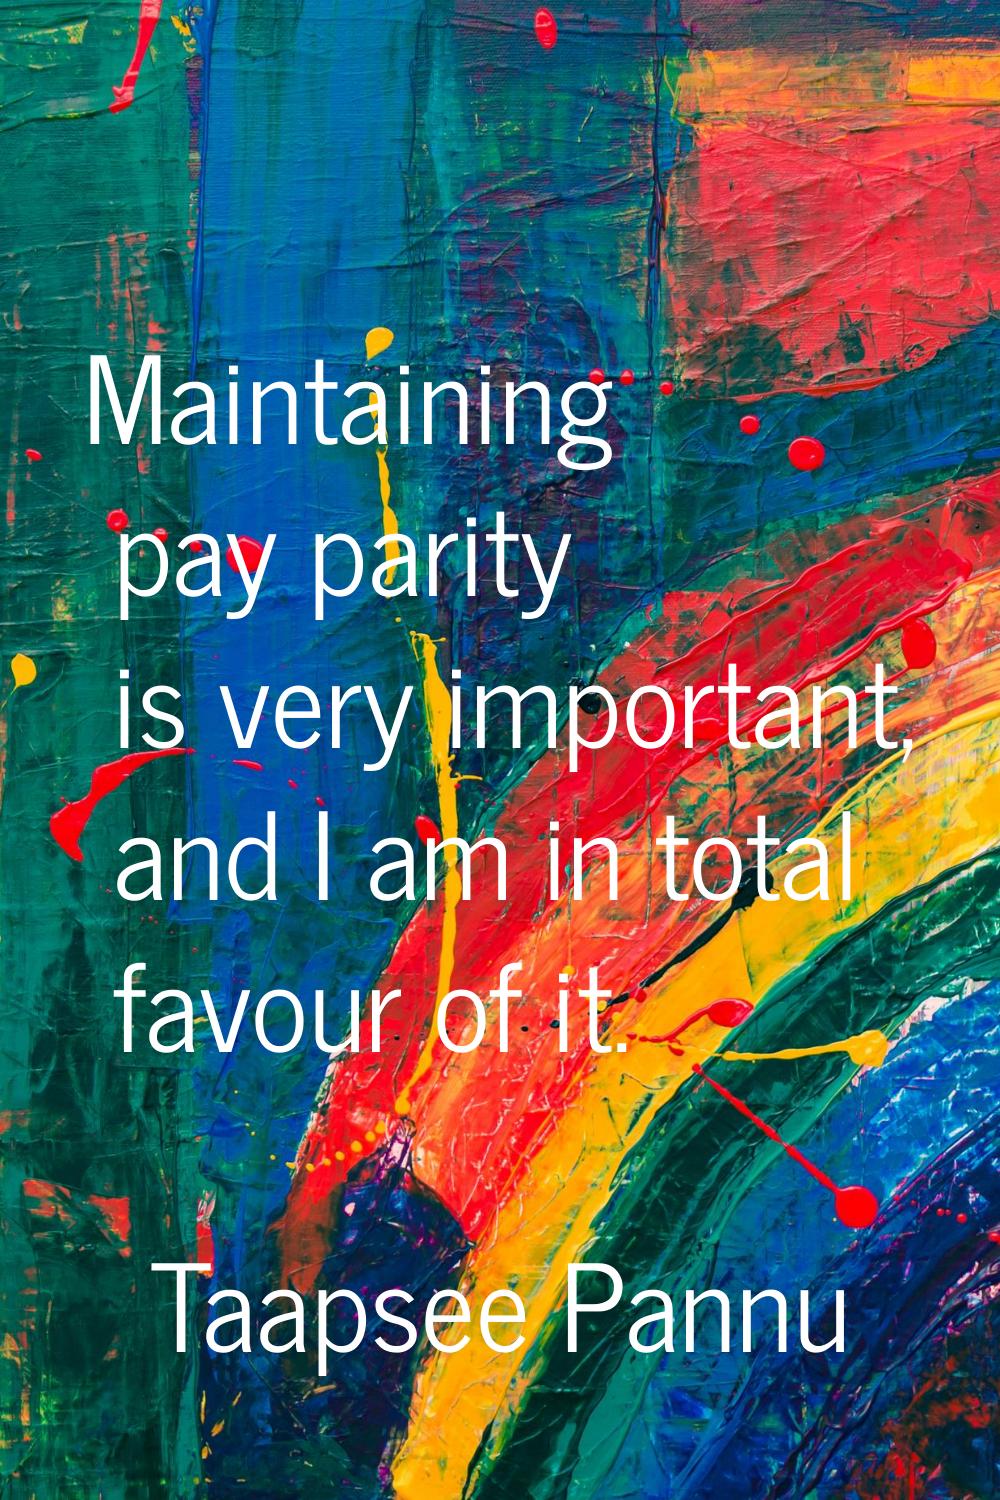 Maintaining pay parity is very important, and I am in total favour of it.